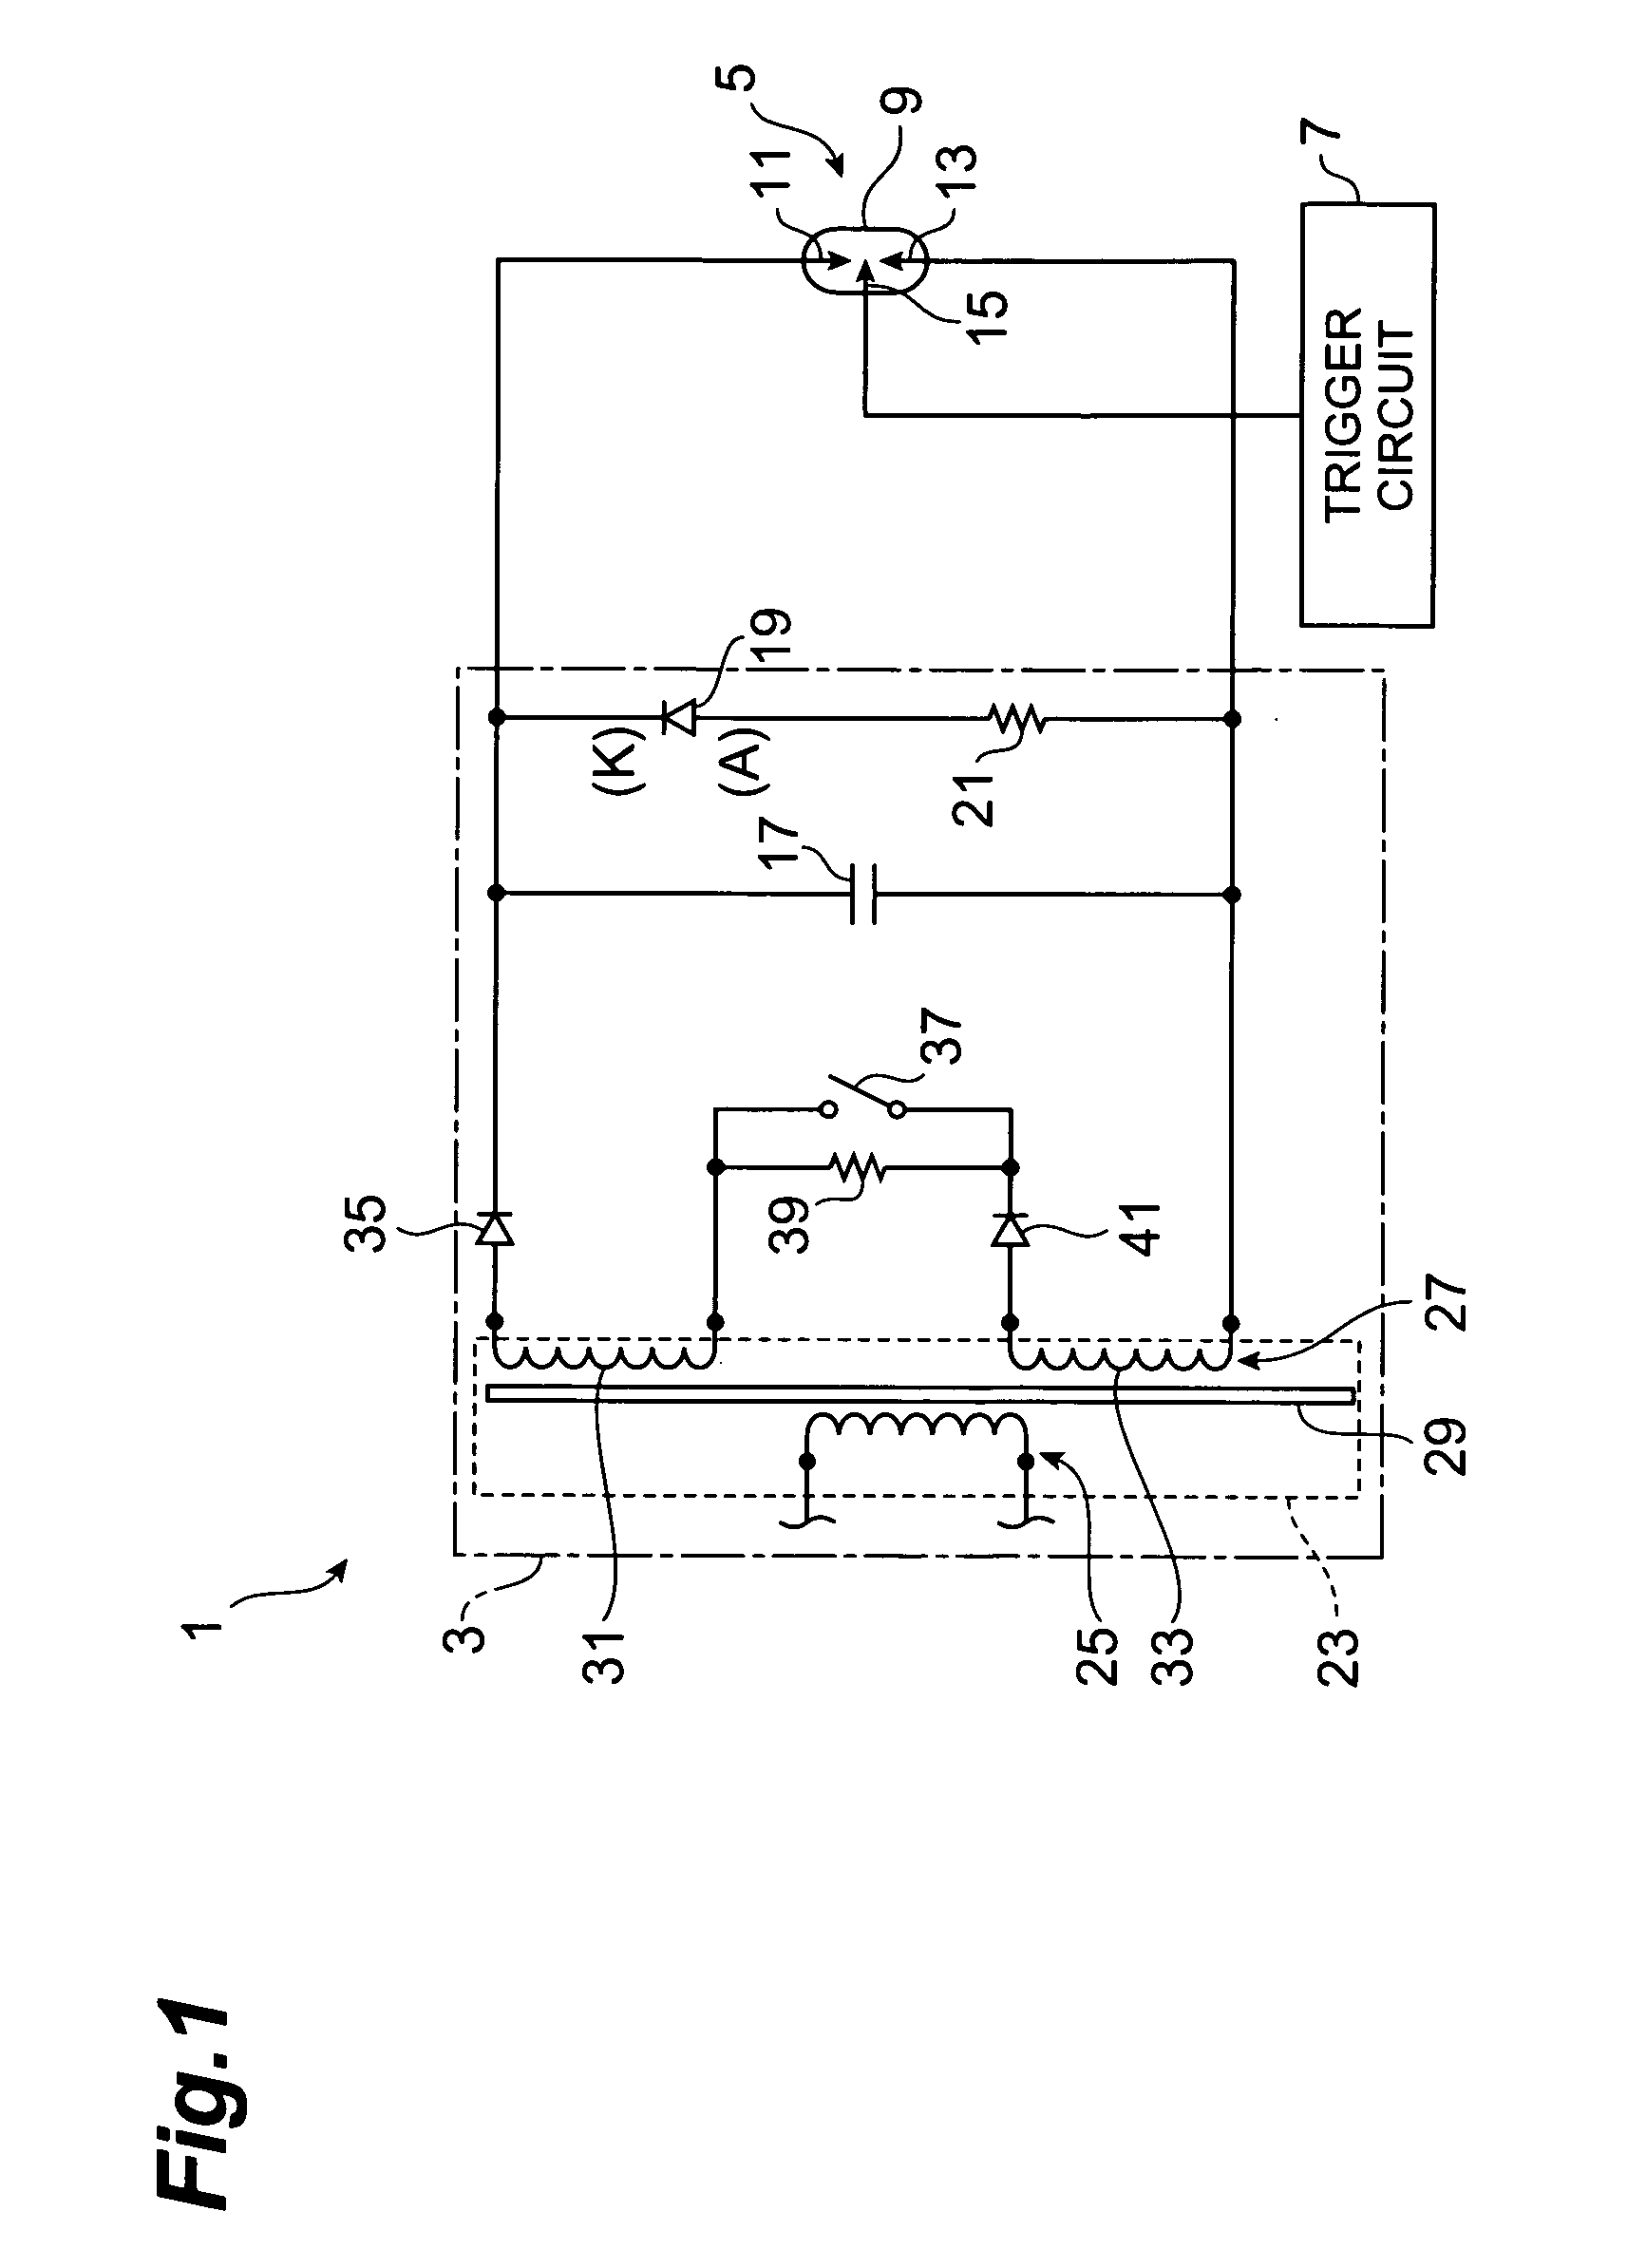 Power supply circuit for flash discharge tube